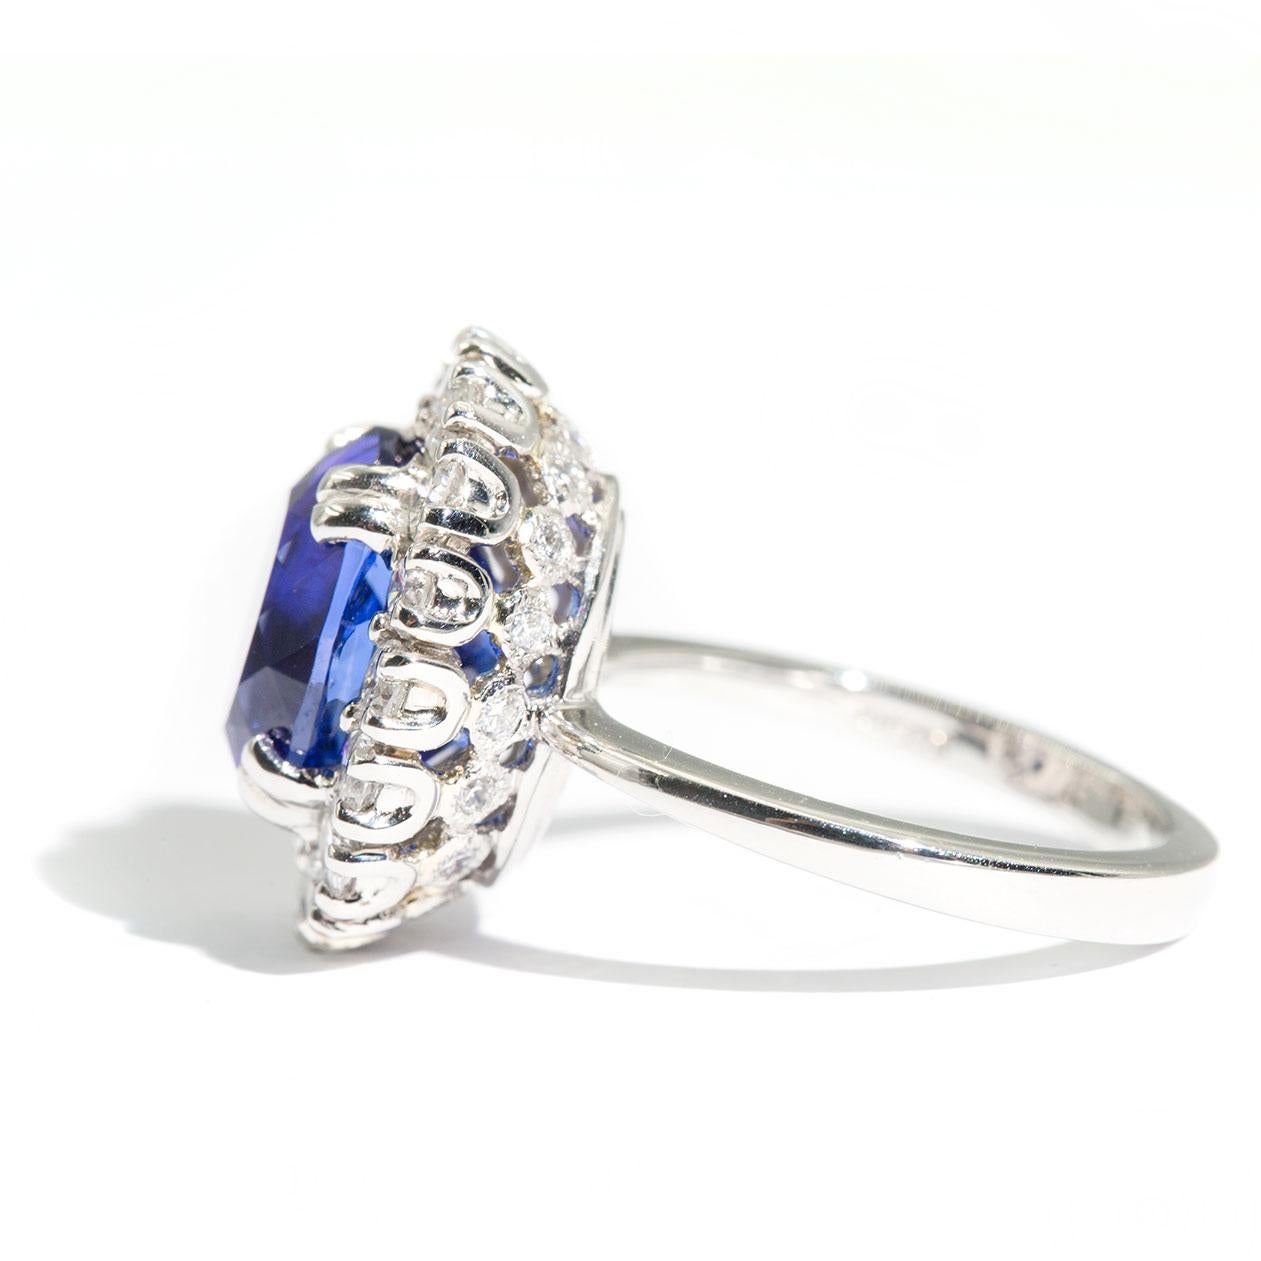 6.47 Carat Oval Flawless Tanzanite and 1.51 Carat Diamond Platinum Cocktail Ring For Sale 4